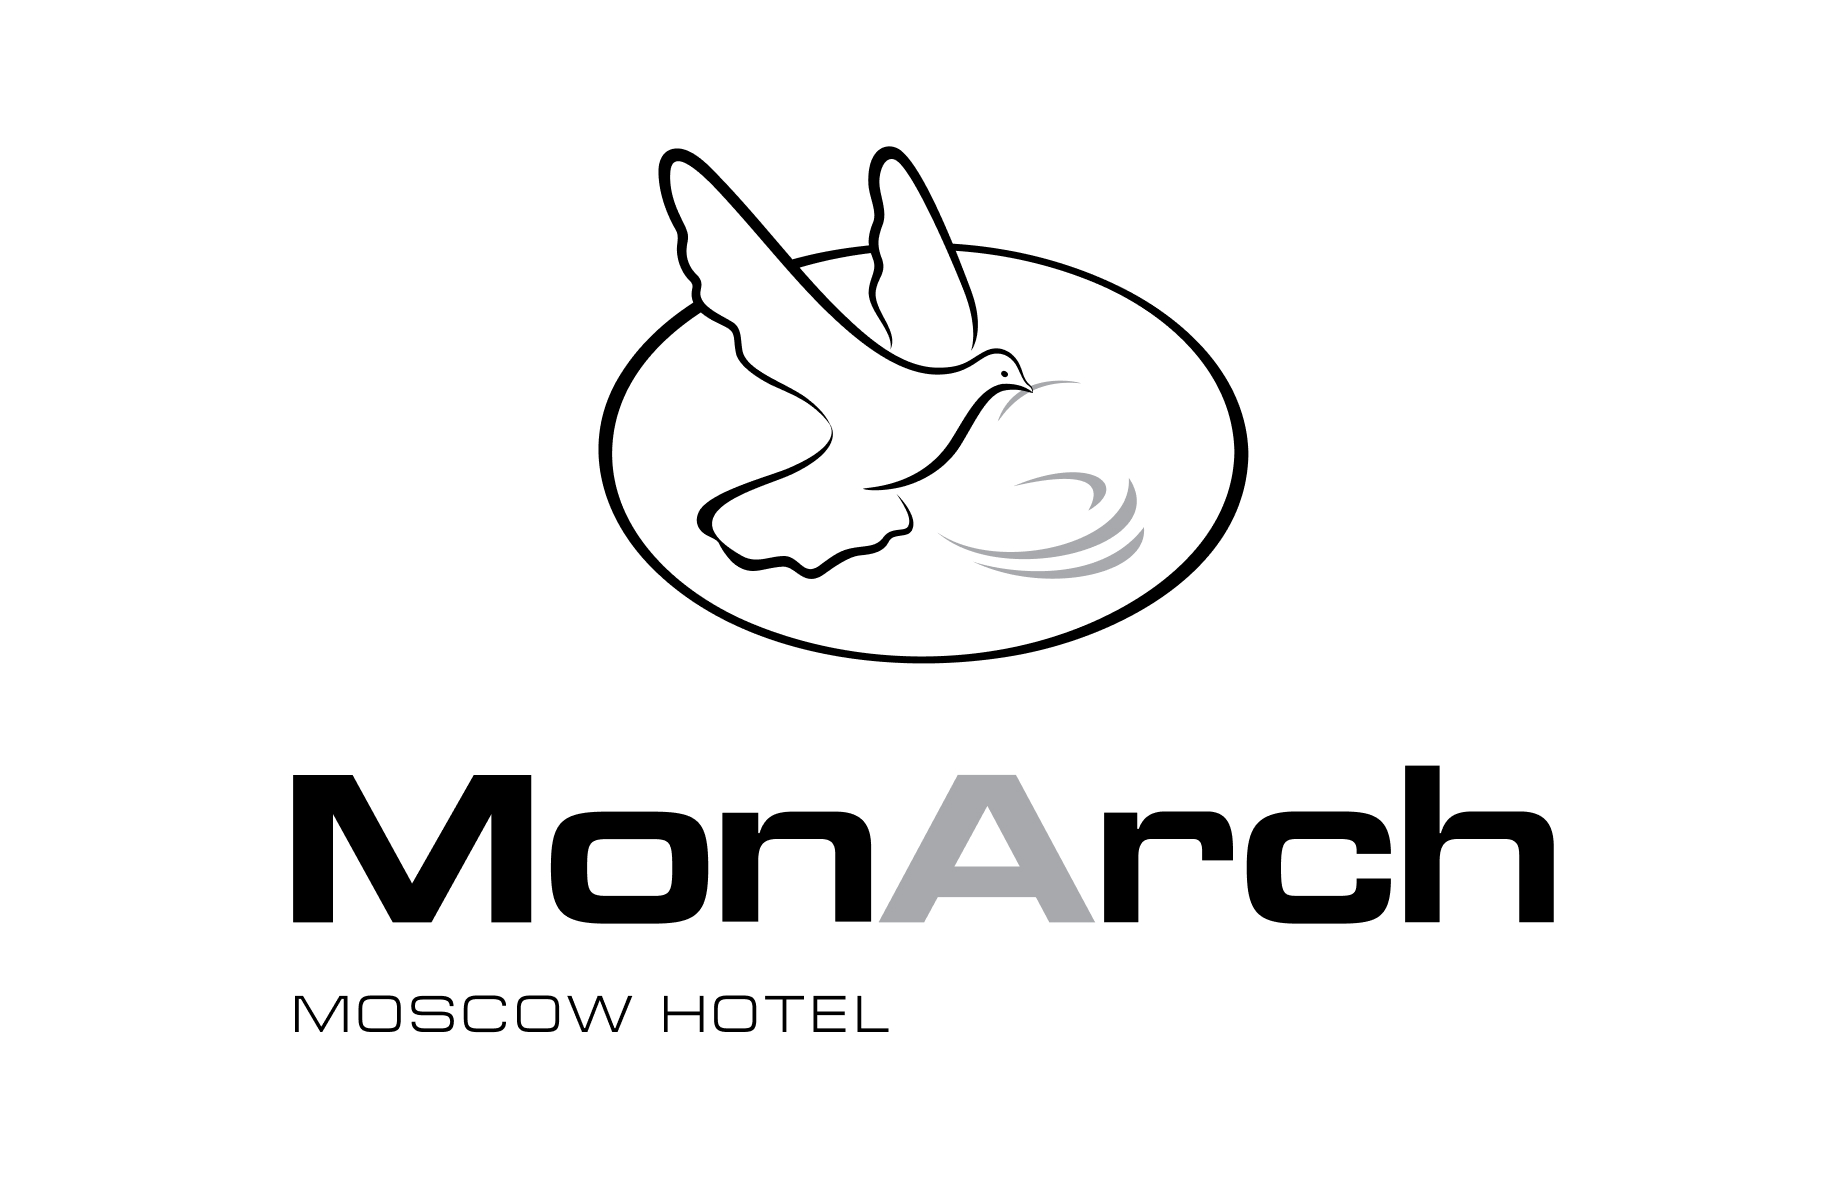 MonArch Moscow Hotel